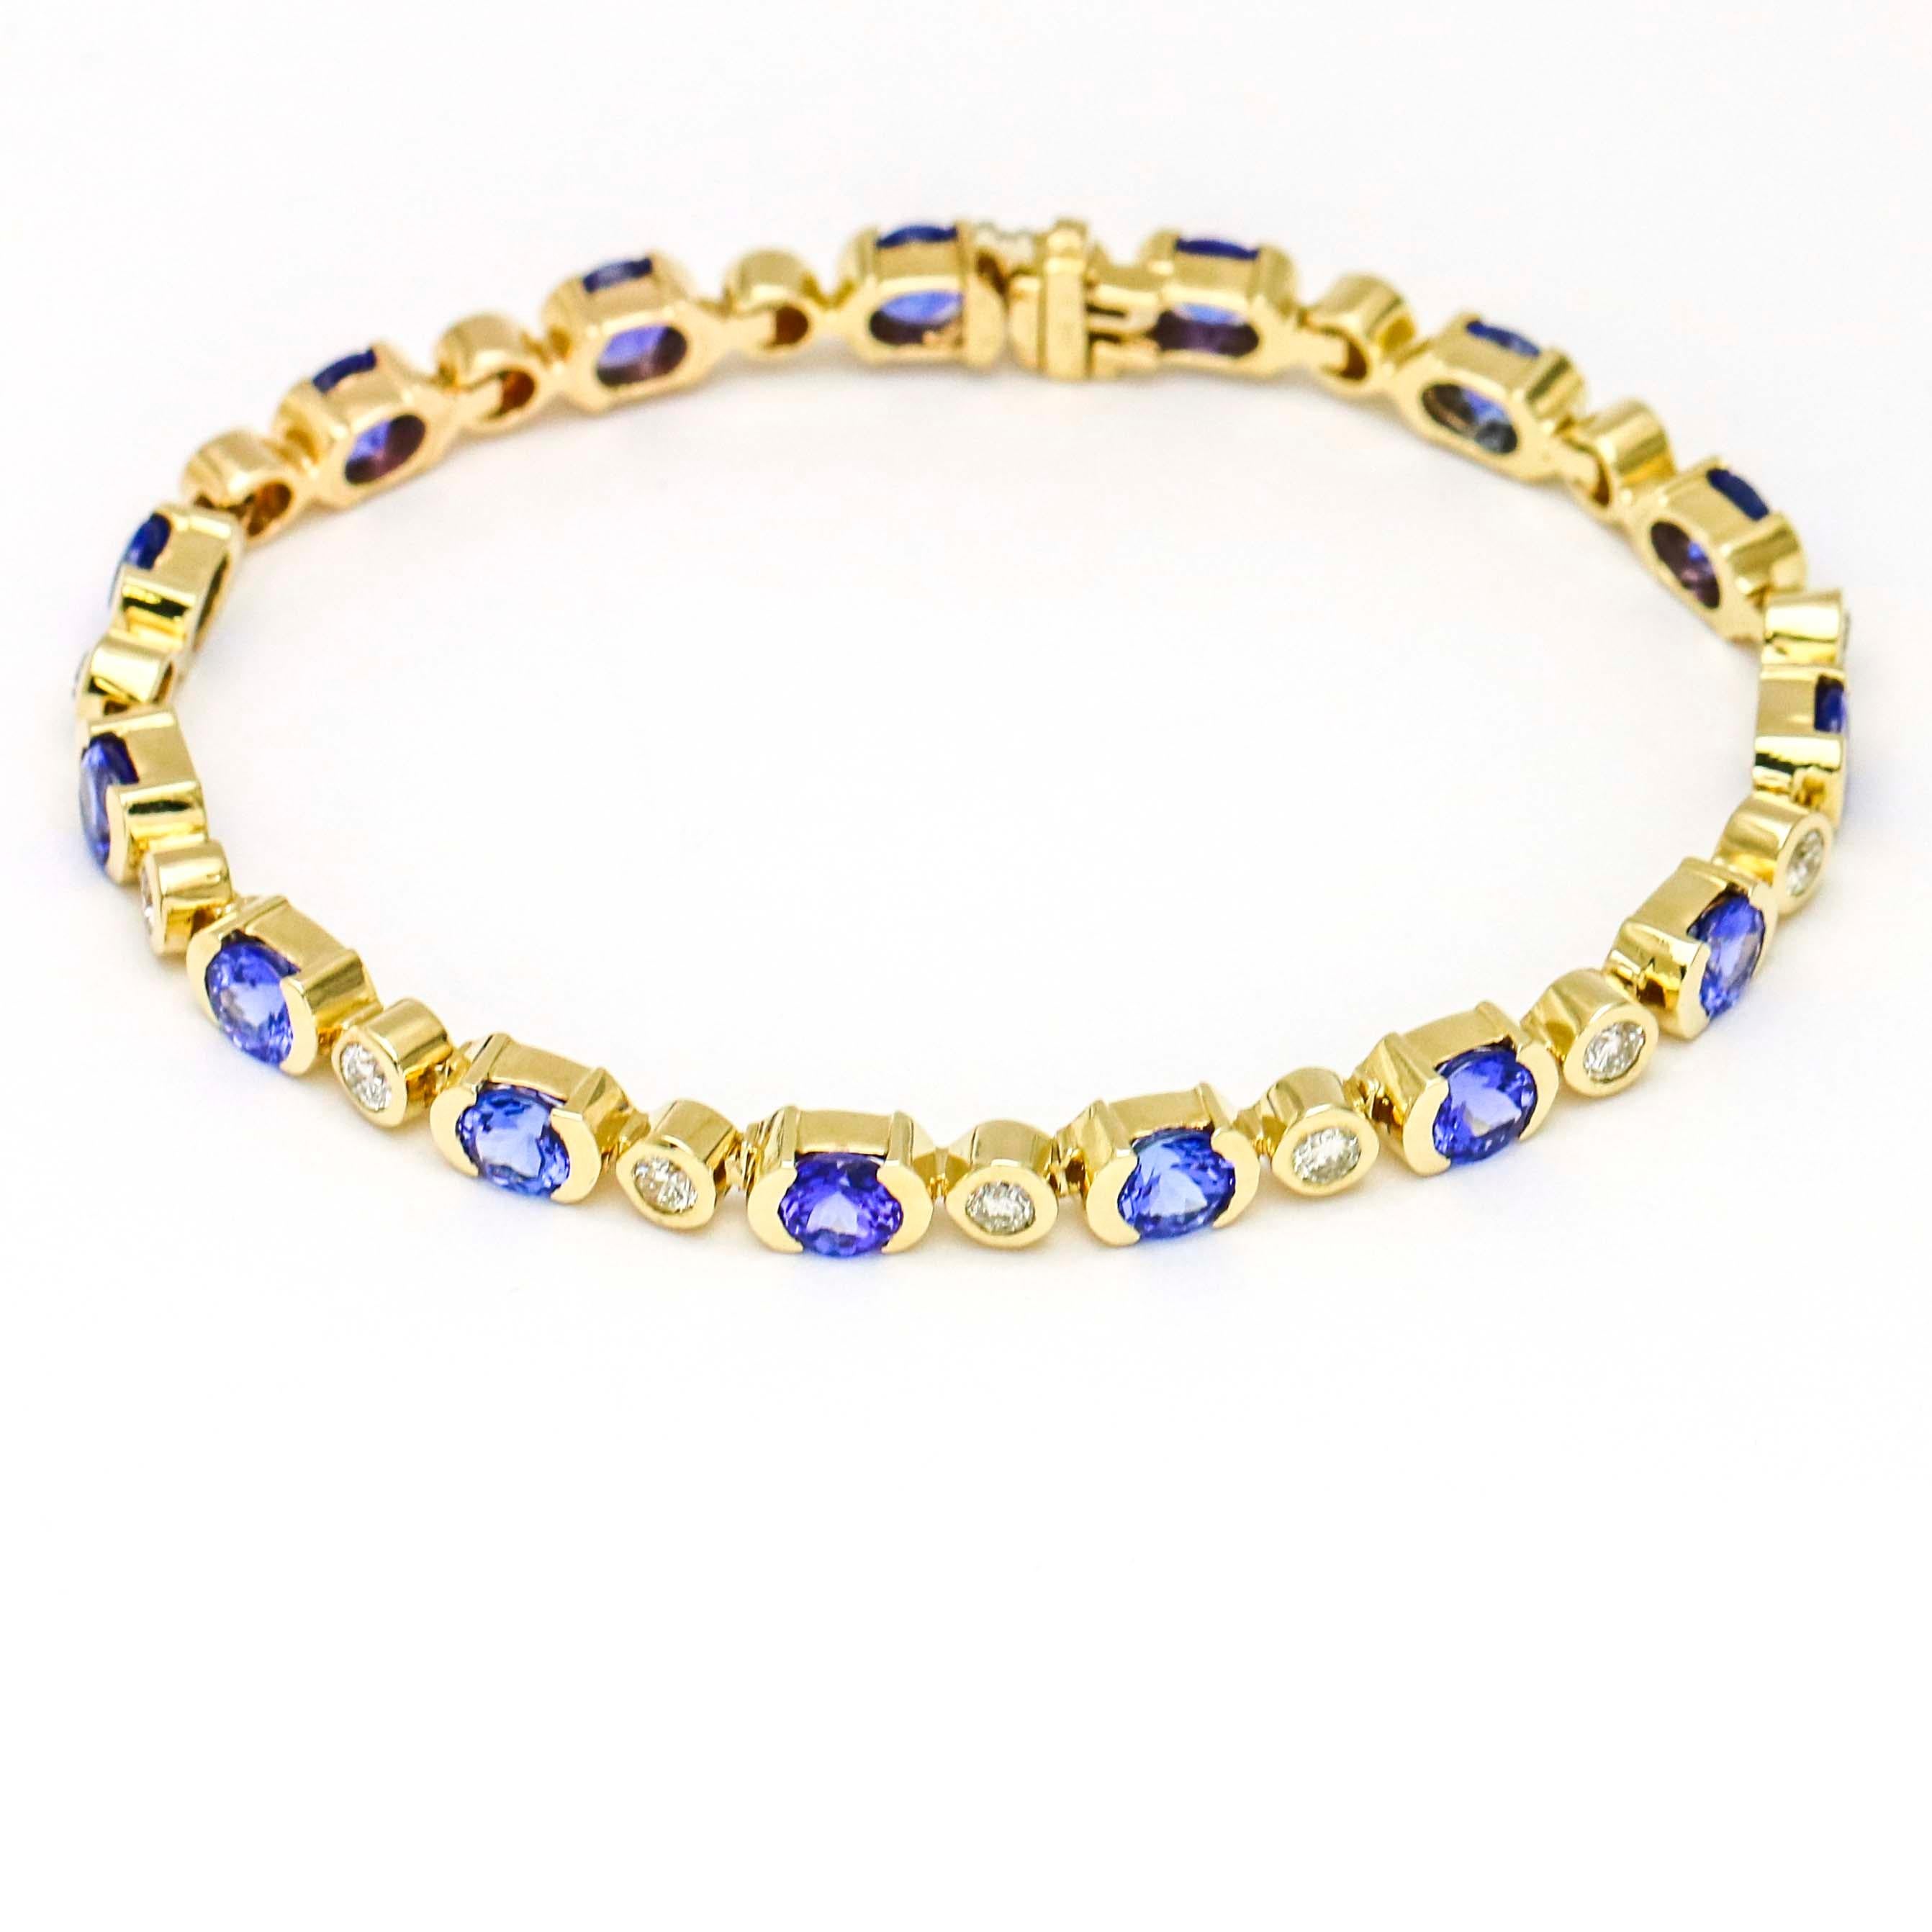 Tanzanite and diamond tennis bracelet crafted in 14 karat yellow gold. The bracelet is bezel set with alternating round Tanzanites and diamonds. Width, 5mm. Size large. 